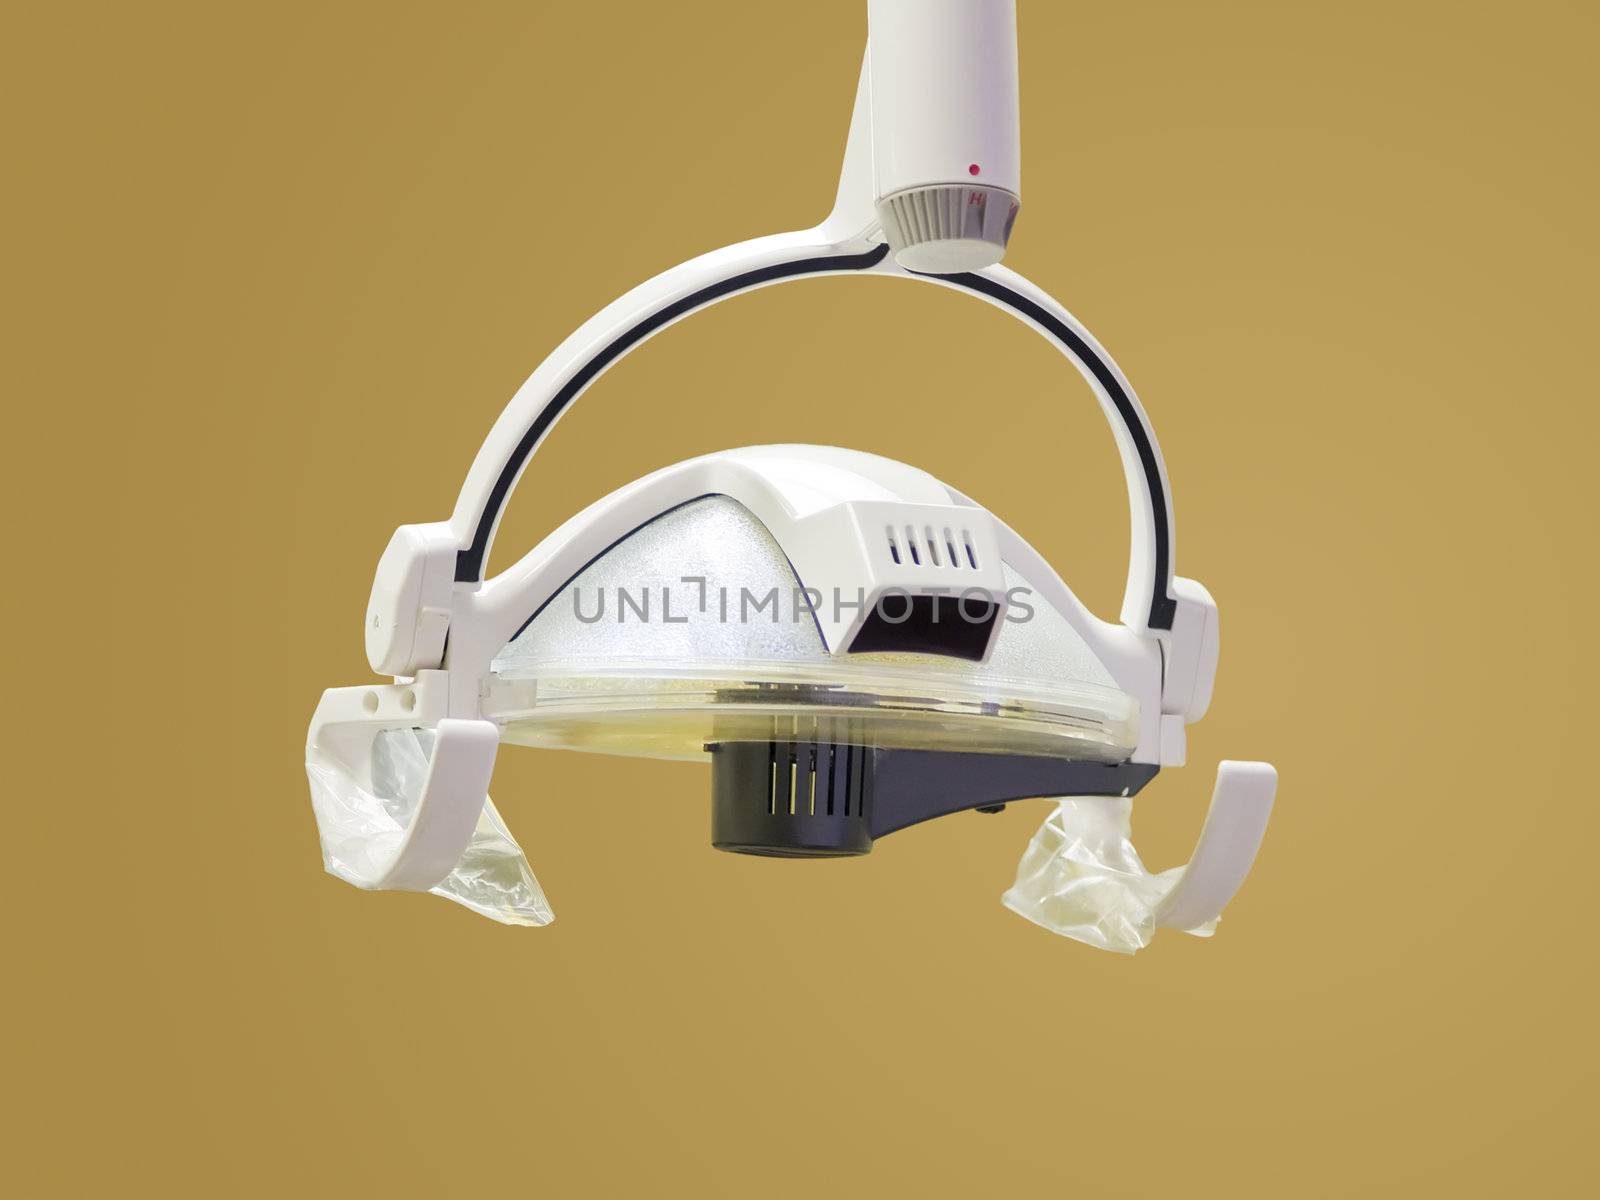 An isolation of a medical light hanging from the ceiling in a dentist's office. Clipping path included.